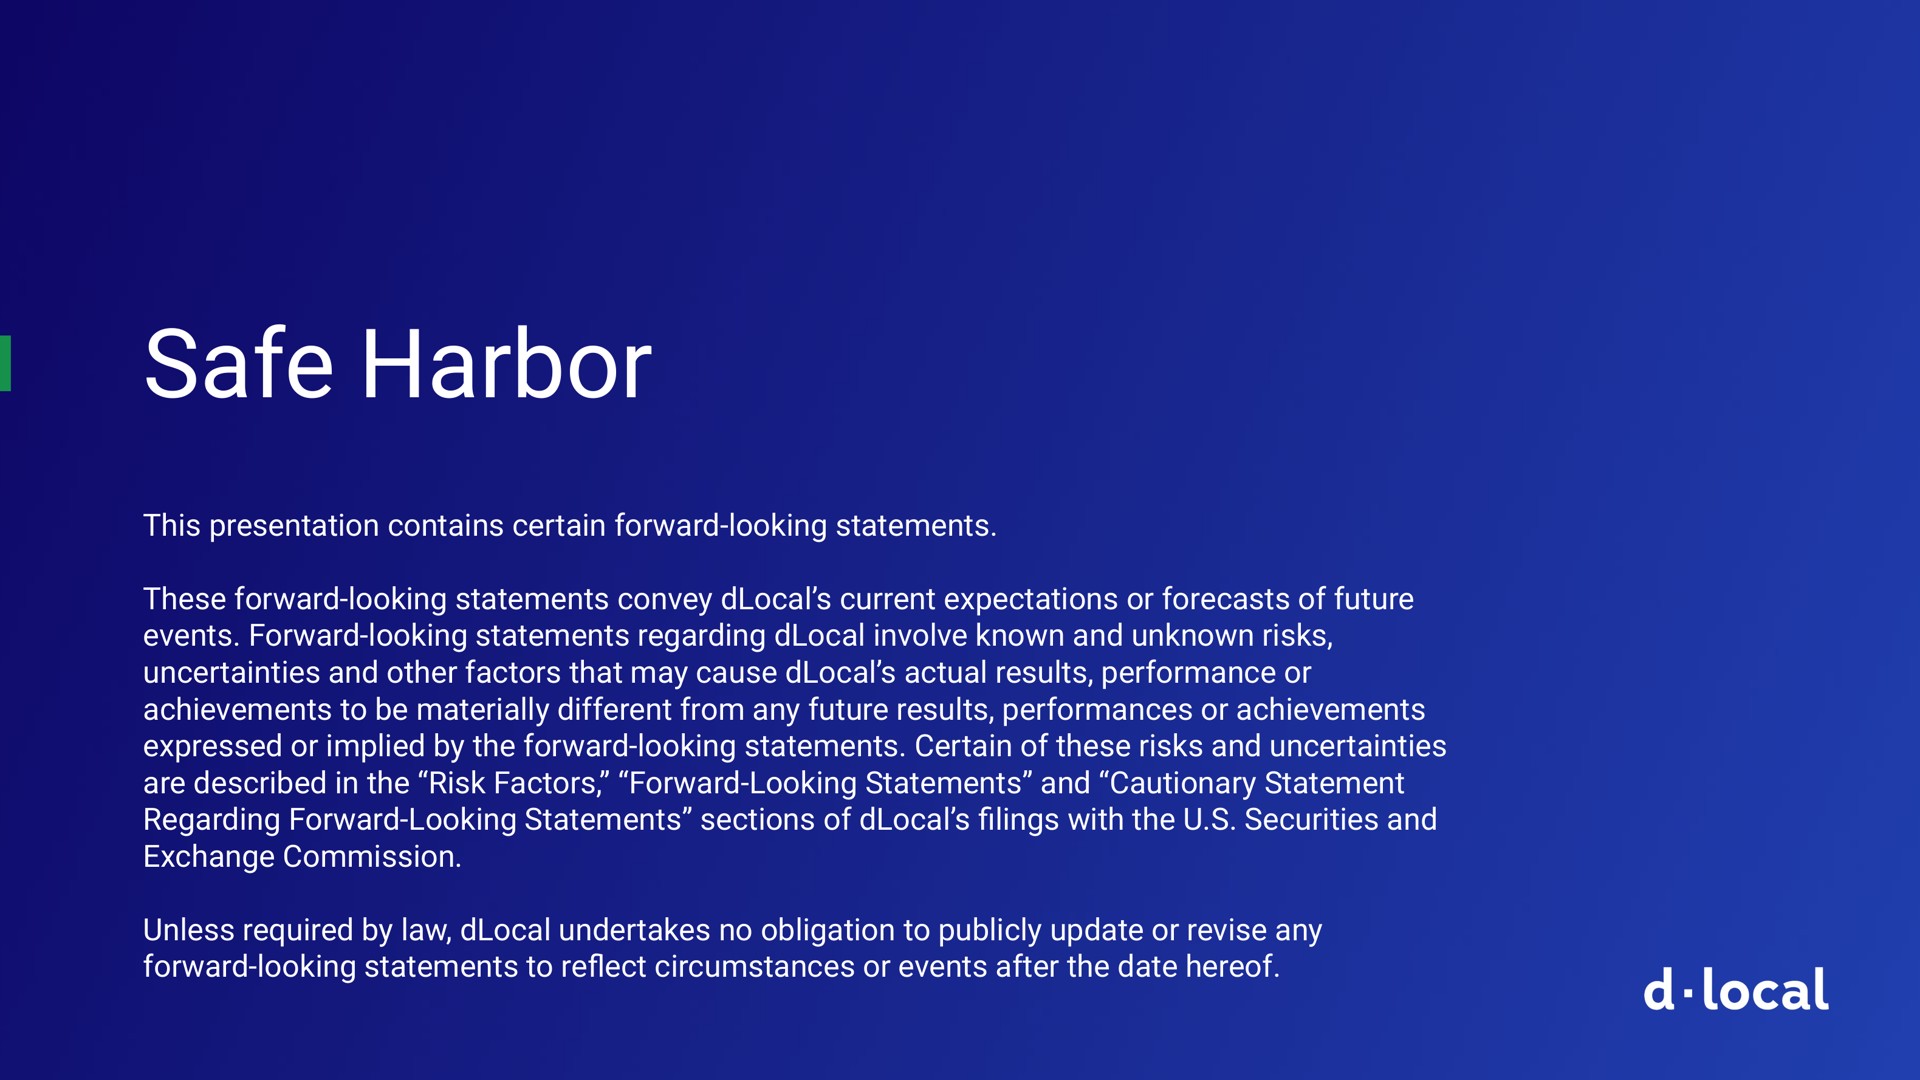 safe harbor this presentation contains certain forward looking statements these forward looking statements convey current expectations or forecasts of future events forward looking statements regarding involve known and unknown risks uncertainties and other factors that may cause actual results performance or achievements to be materially different from any future results performances or achievements expressed or implied by the forward looking statements certain of these risks and uncertainties are described in the risk factors forward looking statements and cautionary statement regarding forward looking statements sections of lings with the securities and exchange commission unless required by law undertakes no obligation to publicly update or revise any forward looking statements to circumstances or events after the date hereof filings reflect local | dLocal